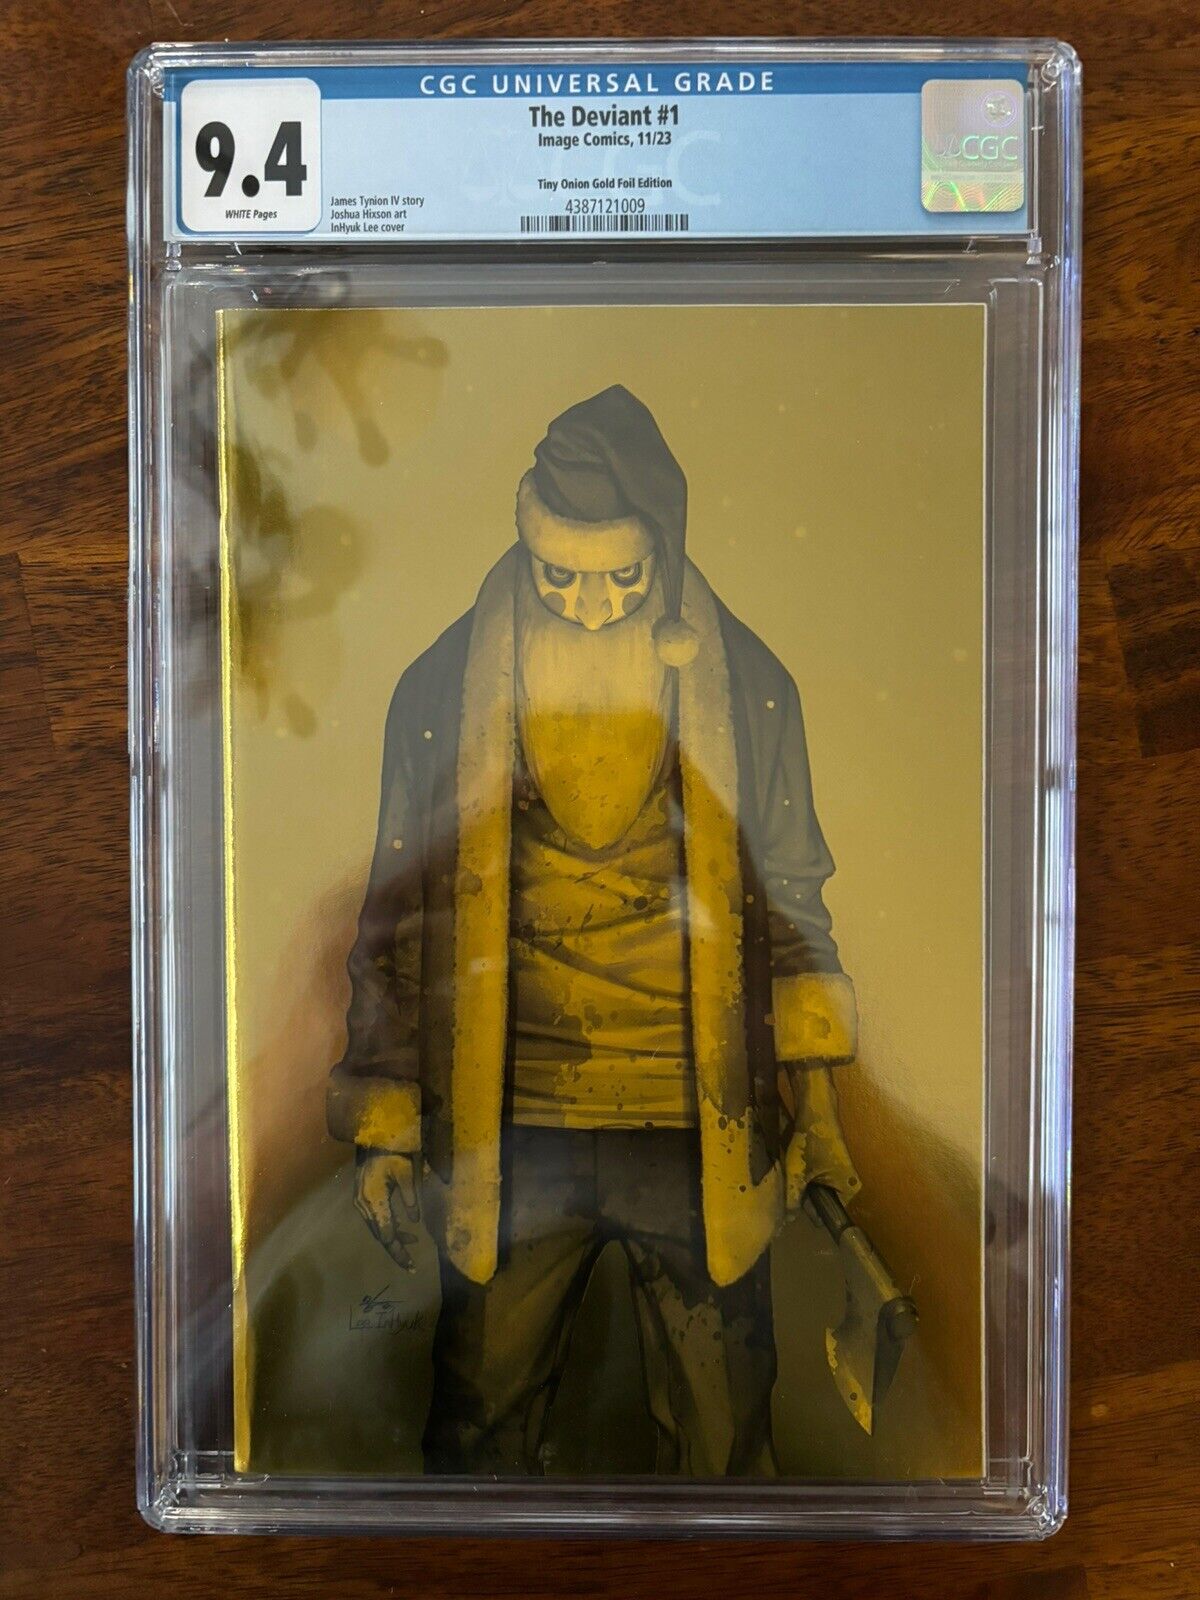 ✨The Deviant #1 - CGC 9.4 - Gold Foil Virgin - Tiny Onion Inhyuk Lee Exclusive